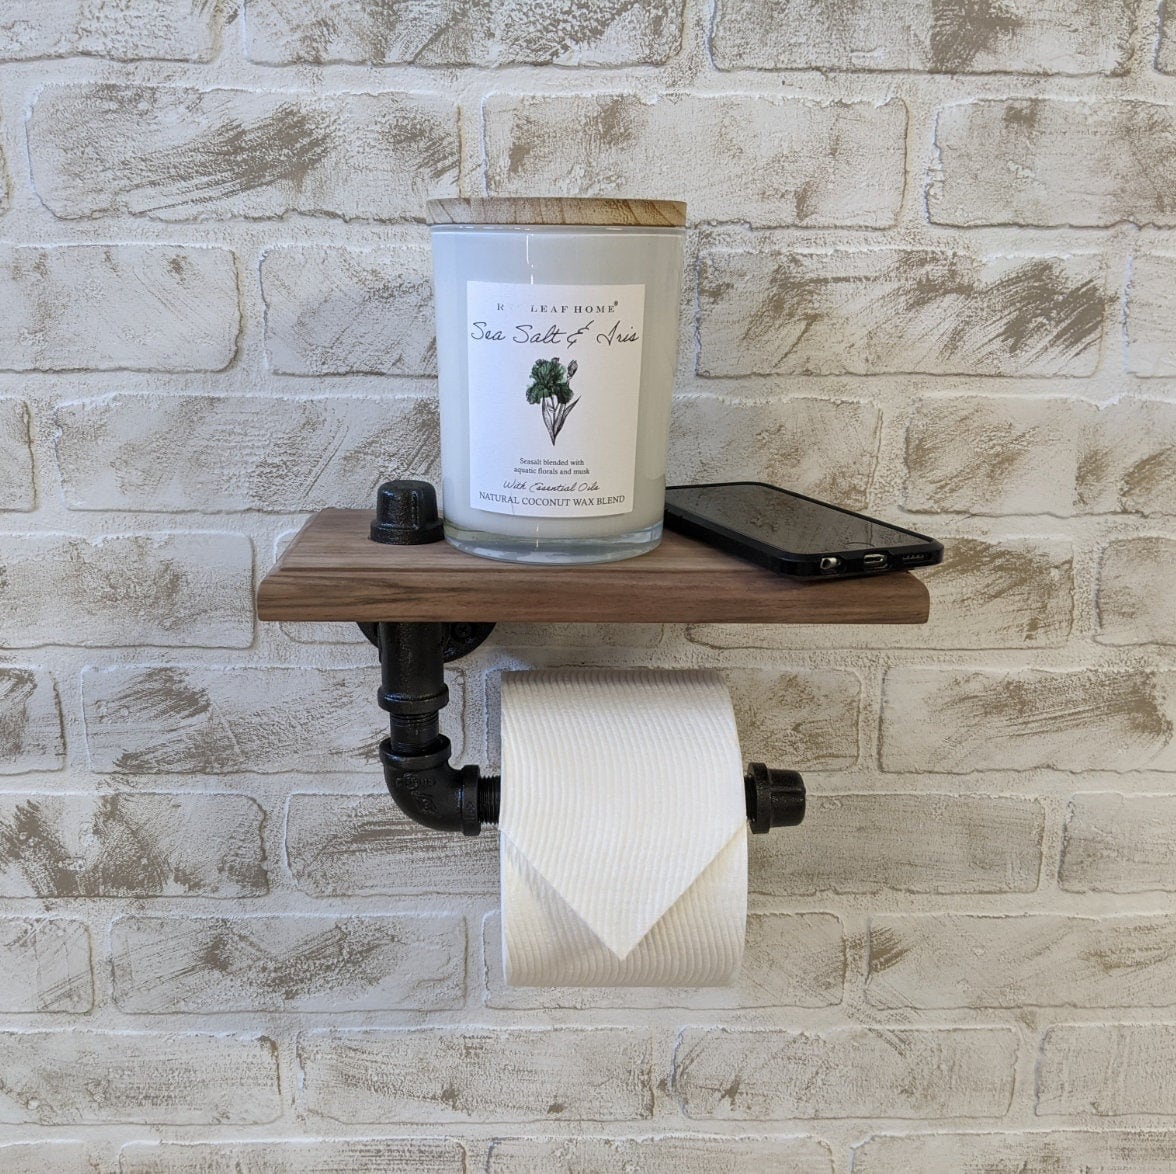 The Wonderful and Amazing Toilet Paper Fishing Reel Holder